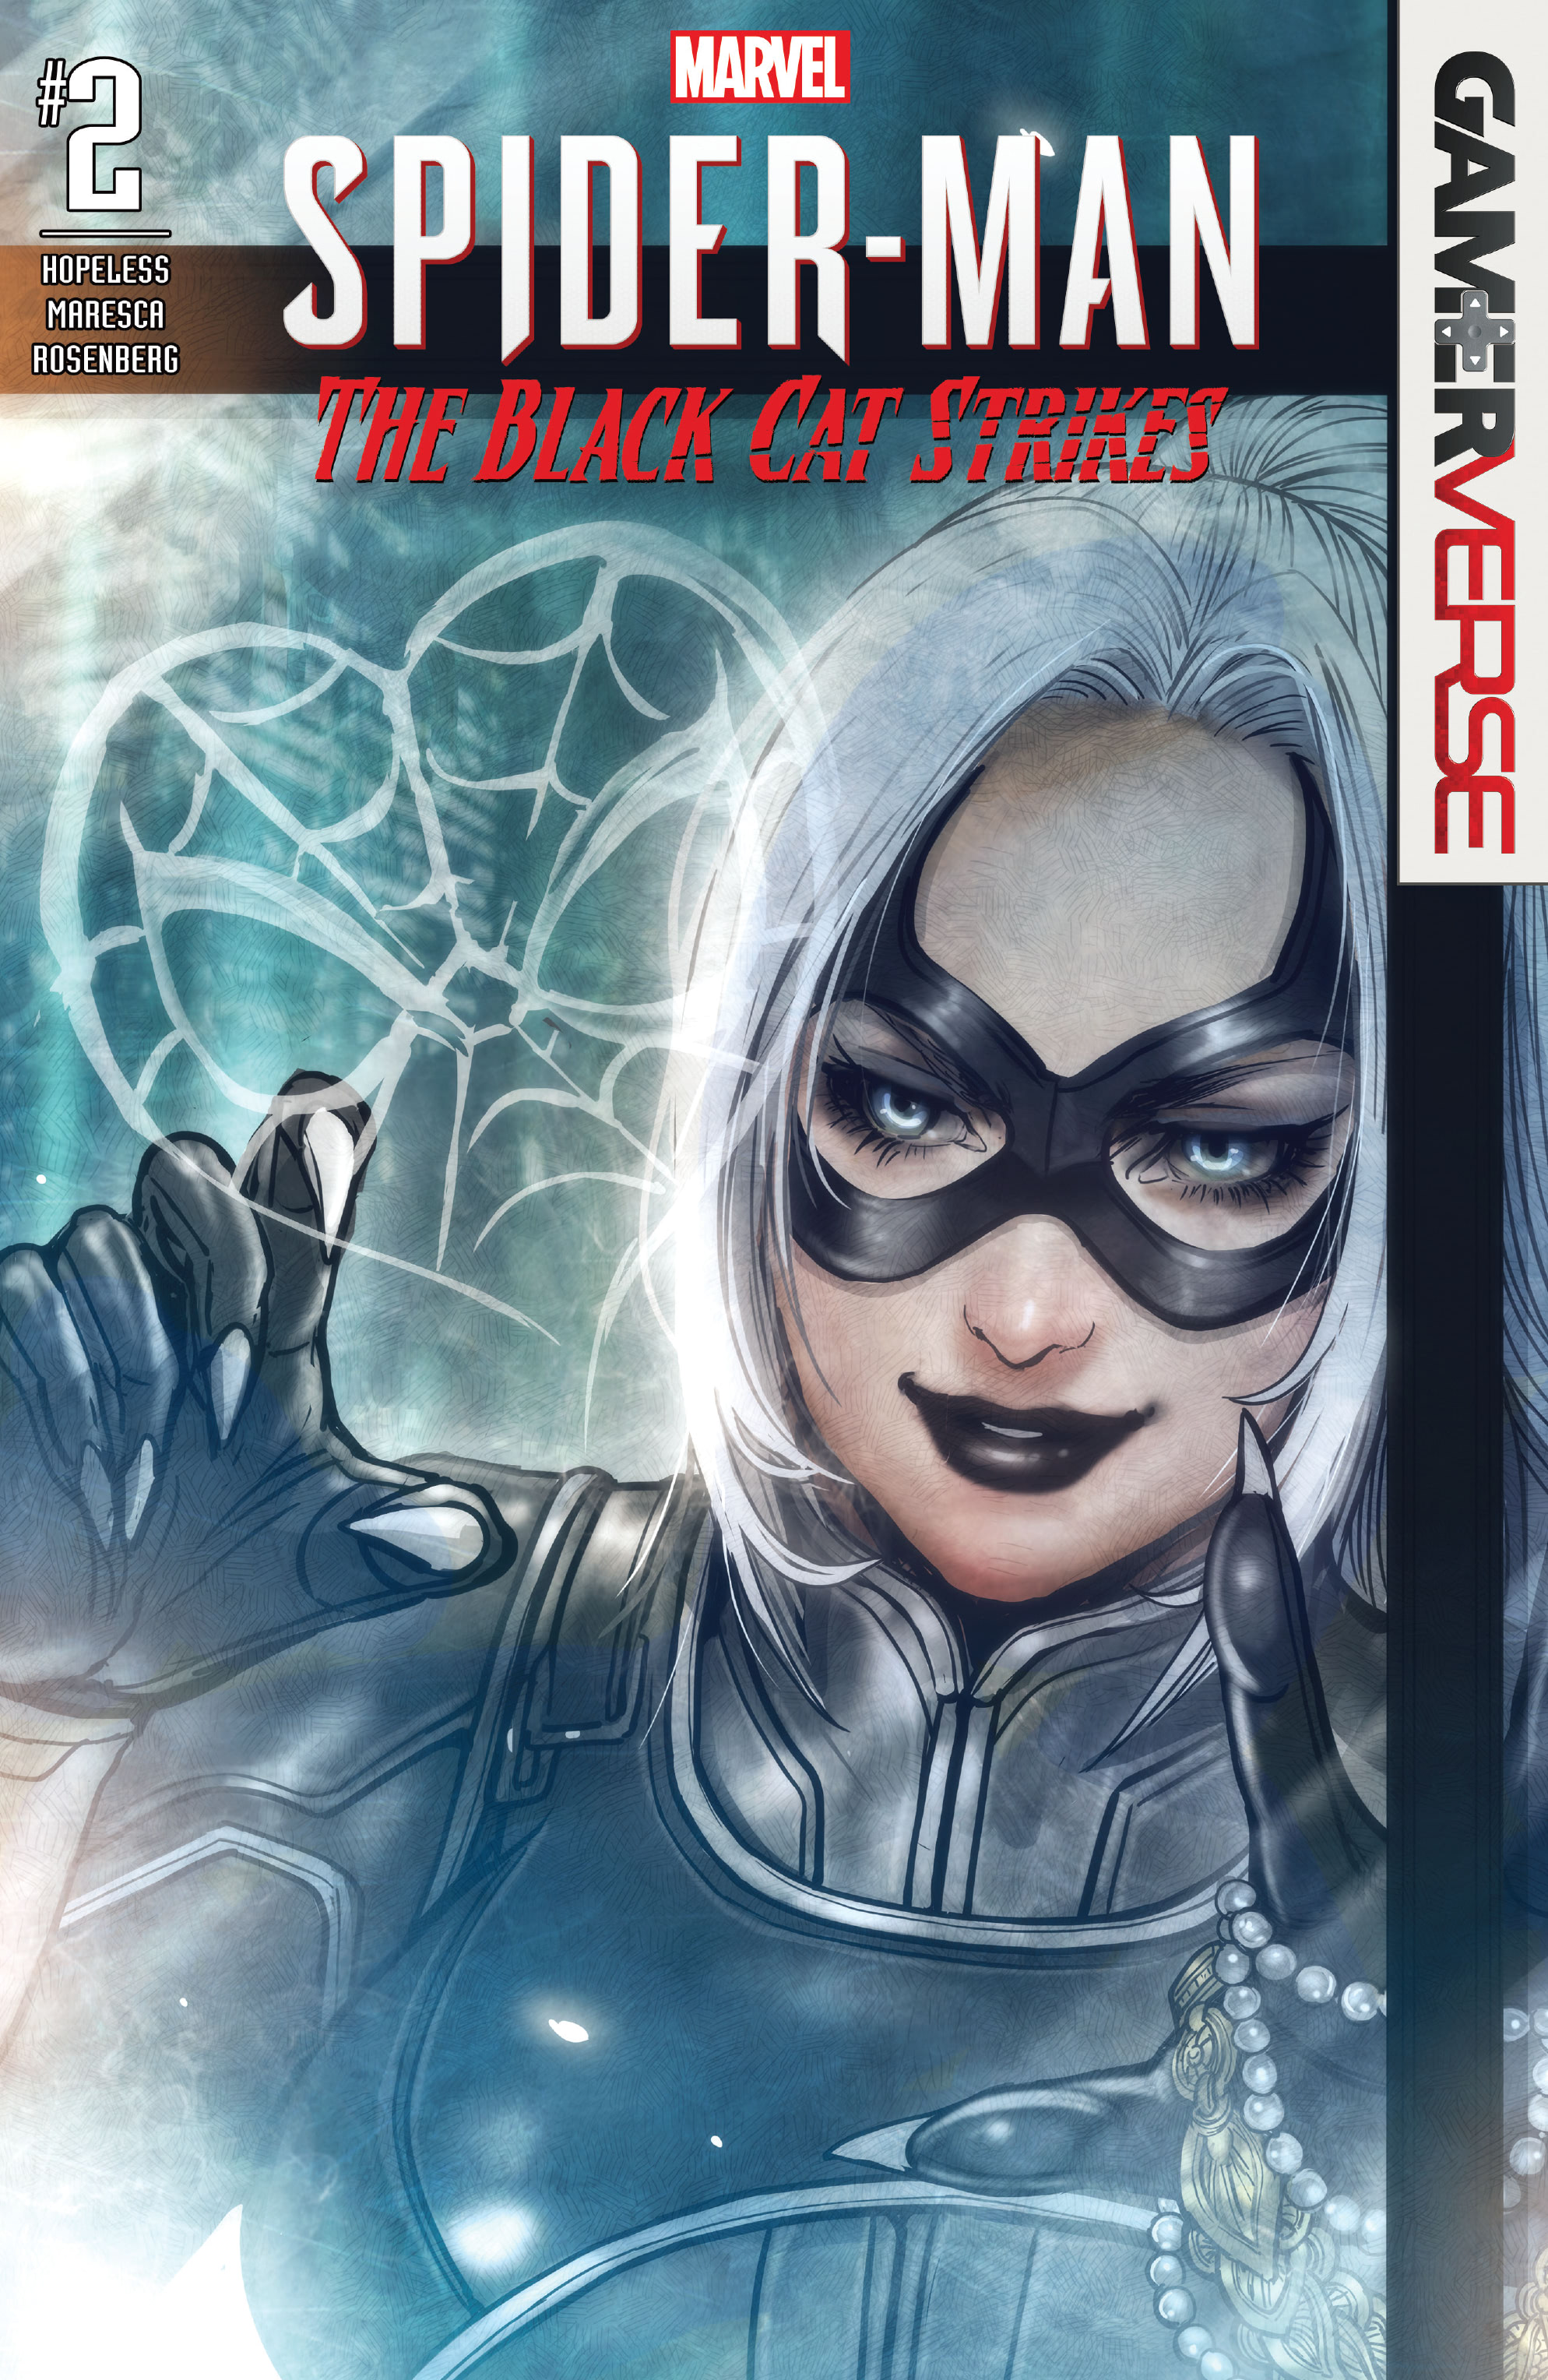 Read online Marvel's Spider-Man: The Black Cat Strikes comic -  Issue #2 - 1